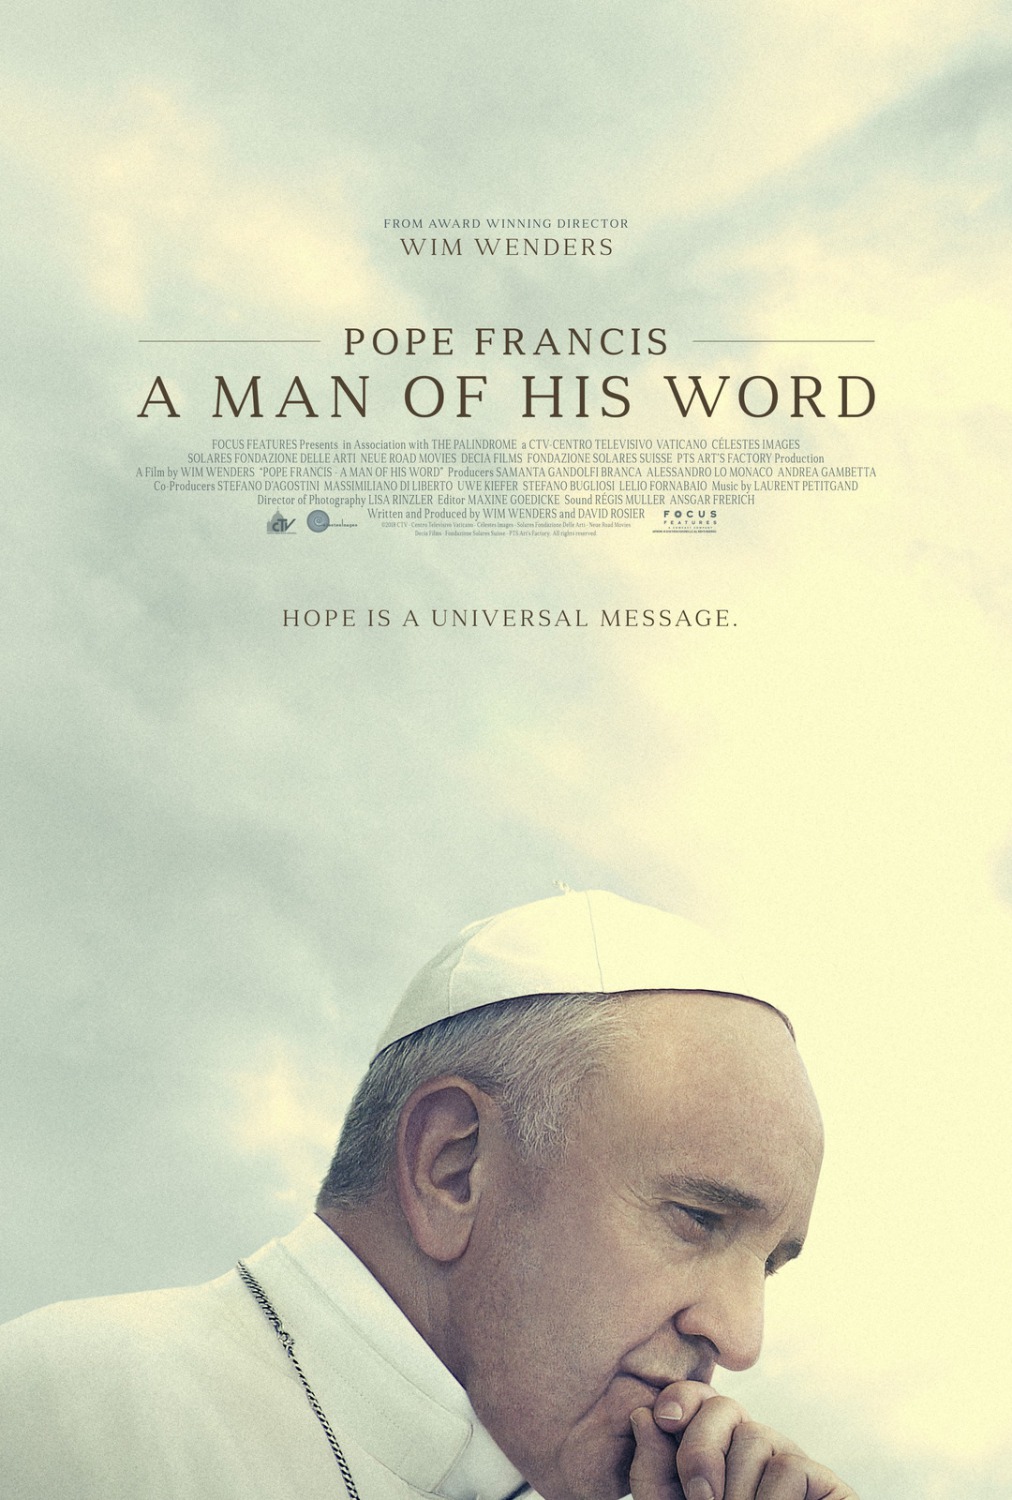 Pope Francis—A Man of His Word